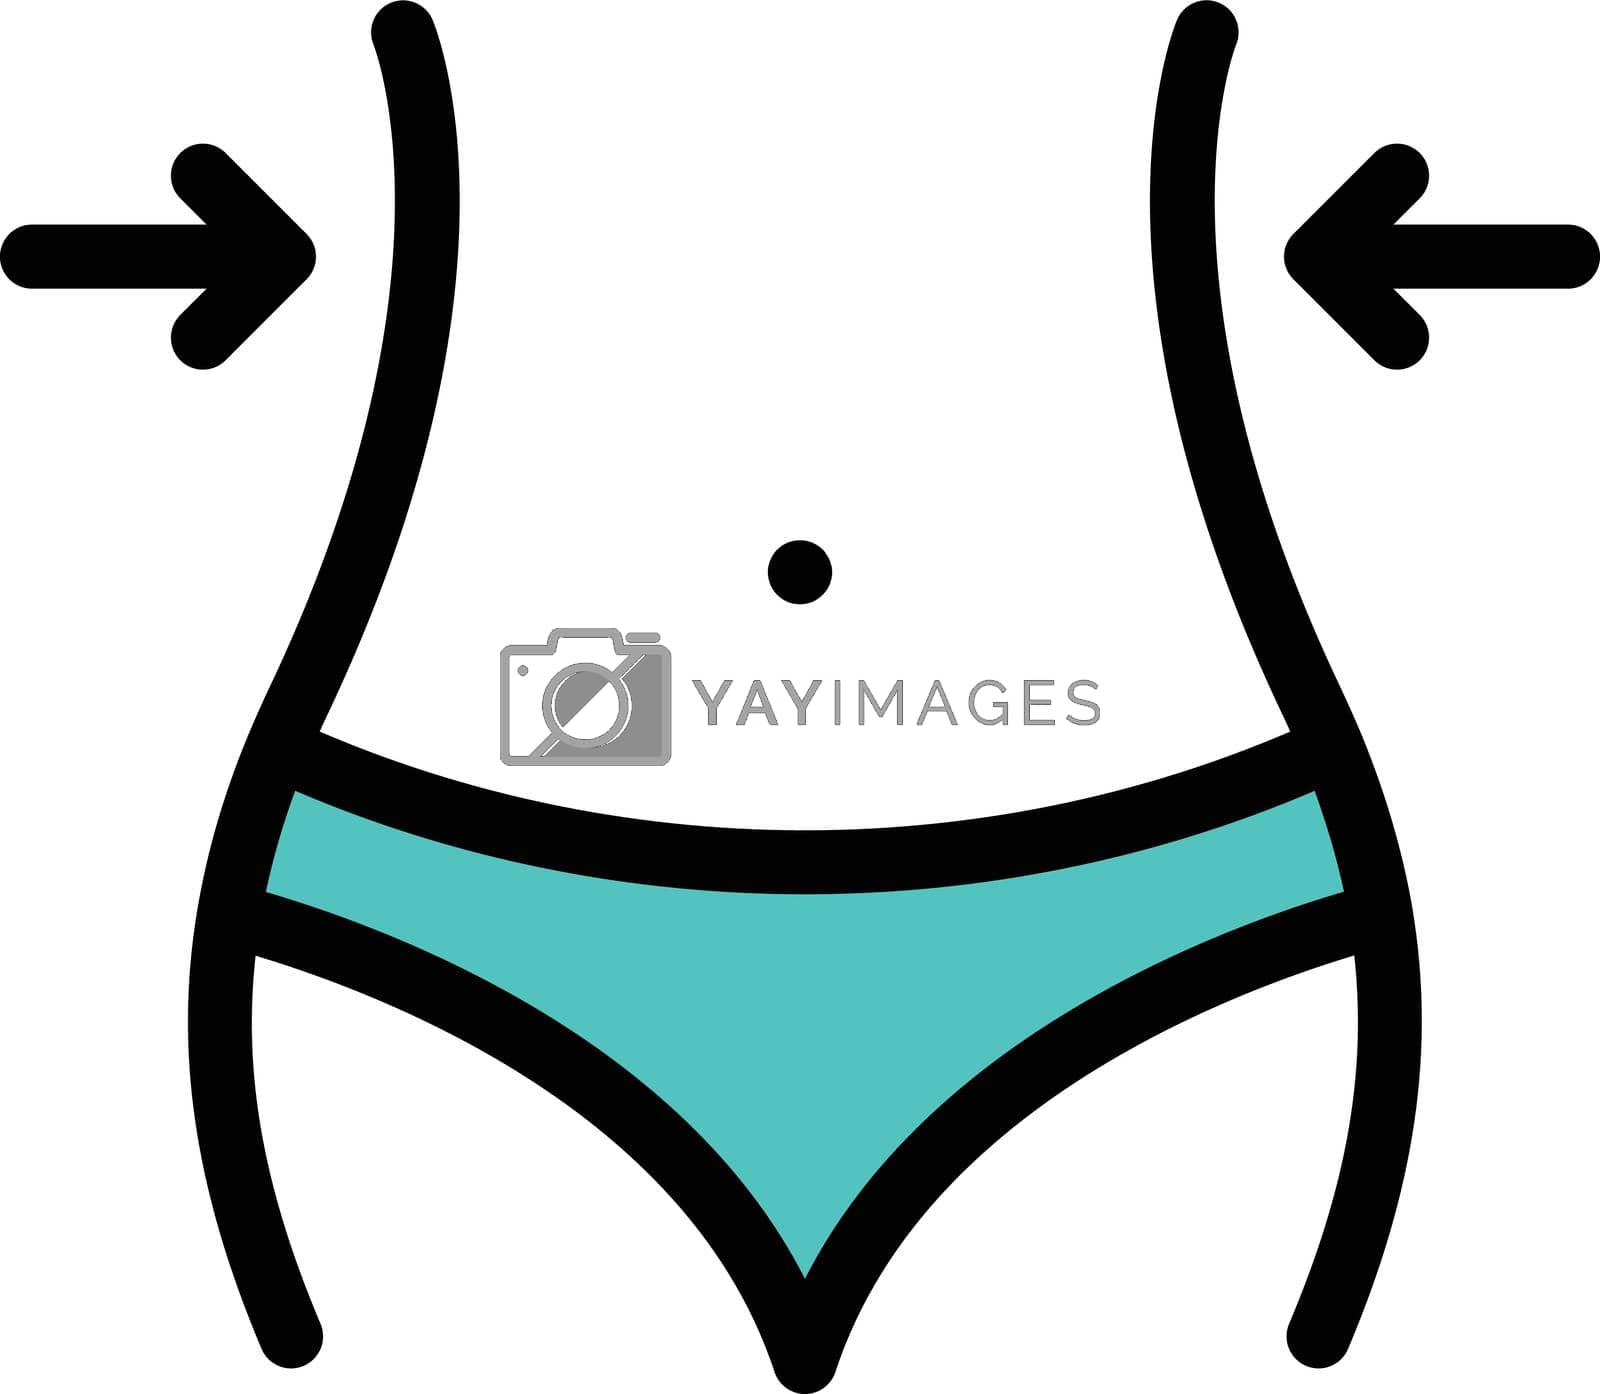 Royalty free image of waist by FlaticonsDesign